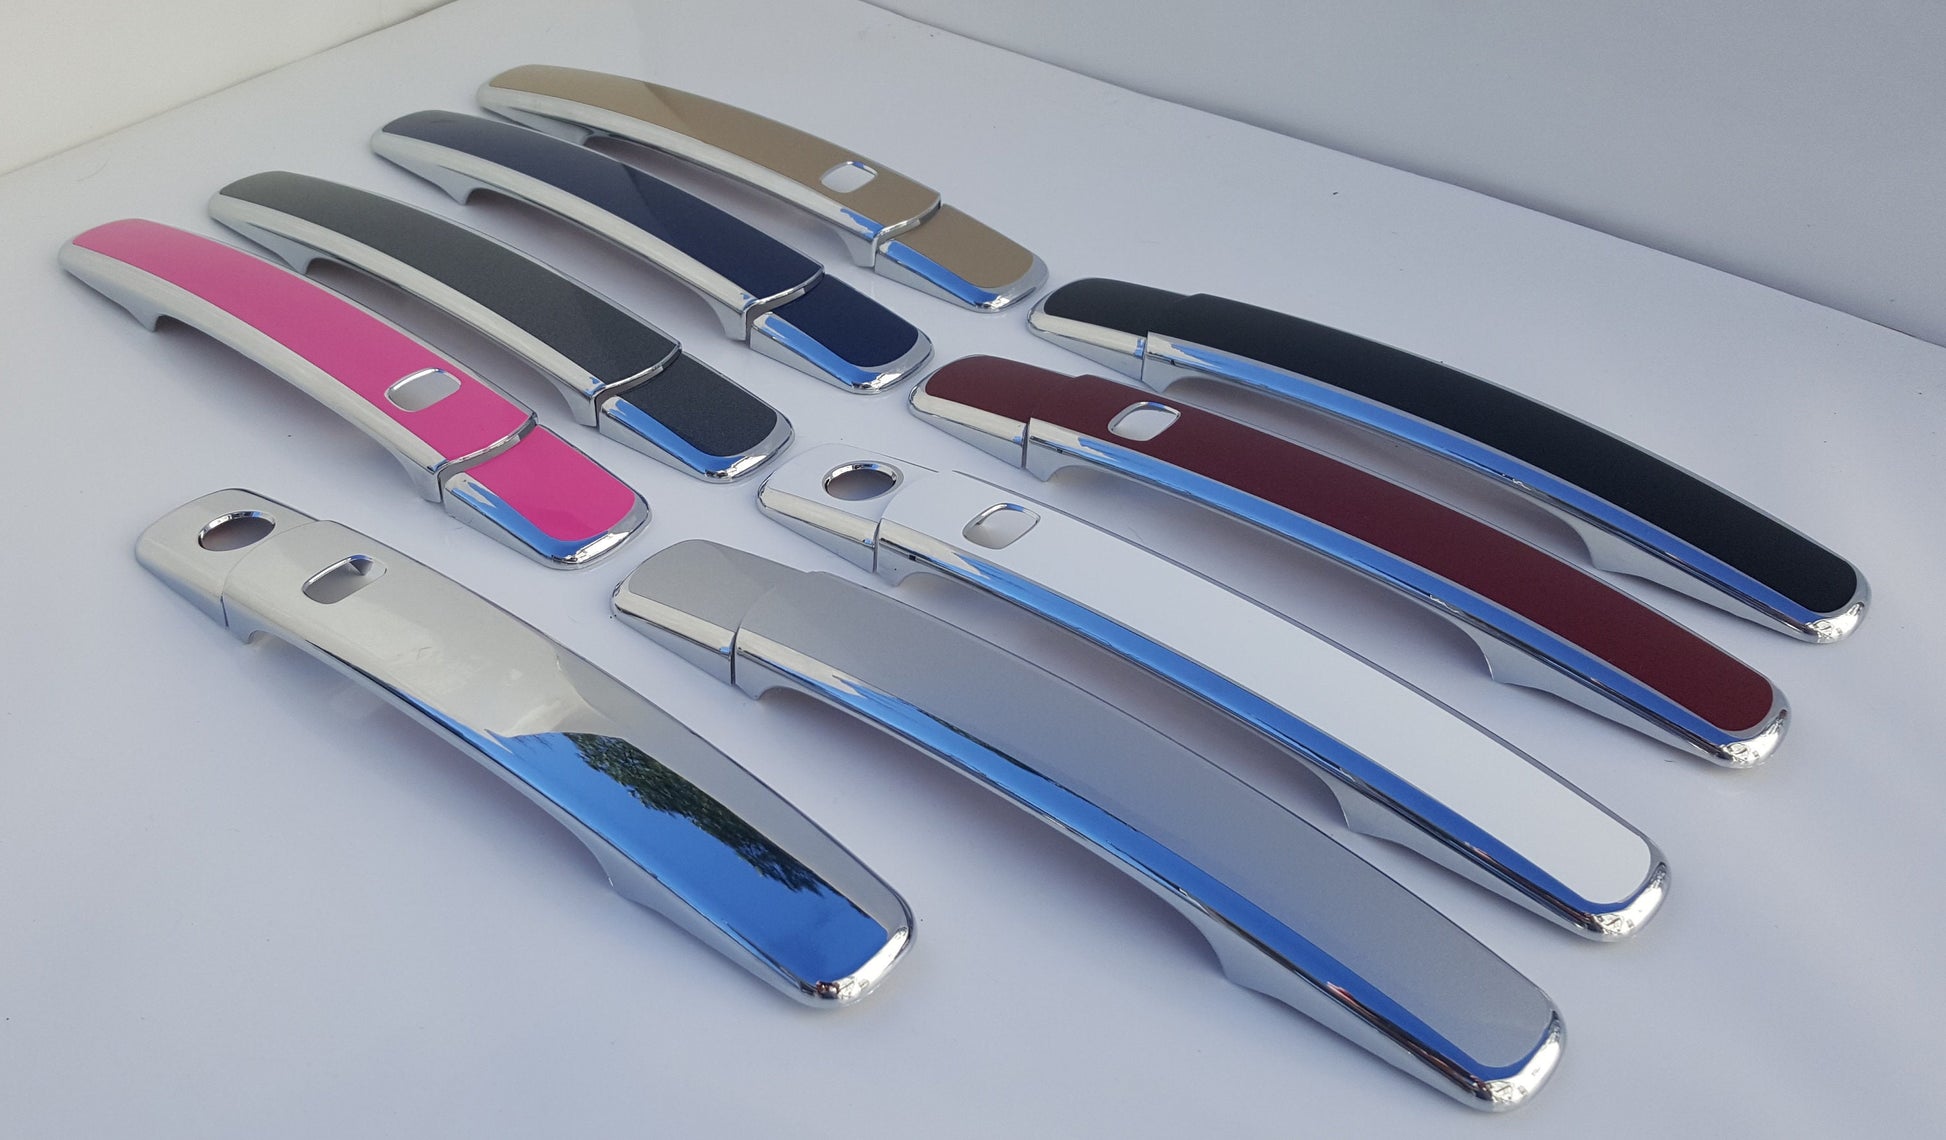 Full Set of Custom Chrome Door Handle Overlays / Covers For the 2003 - 2008 Infiniti X35 You Choose the Color of the Middle Insert